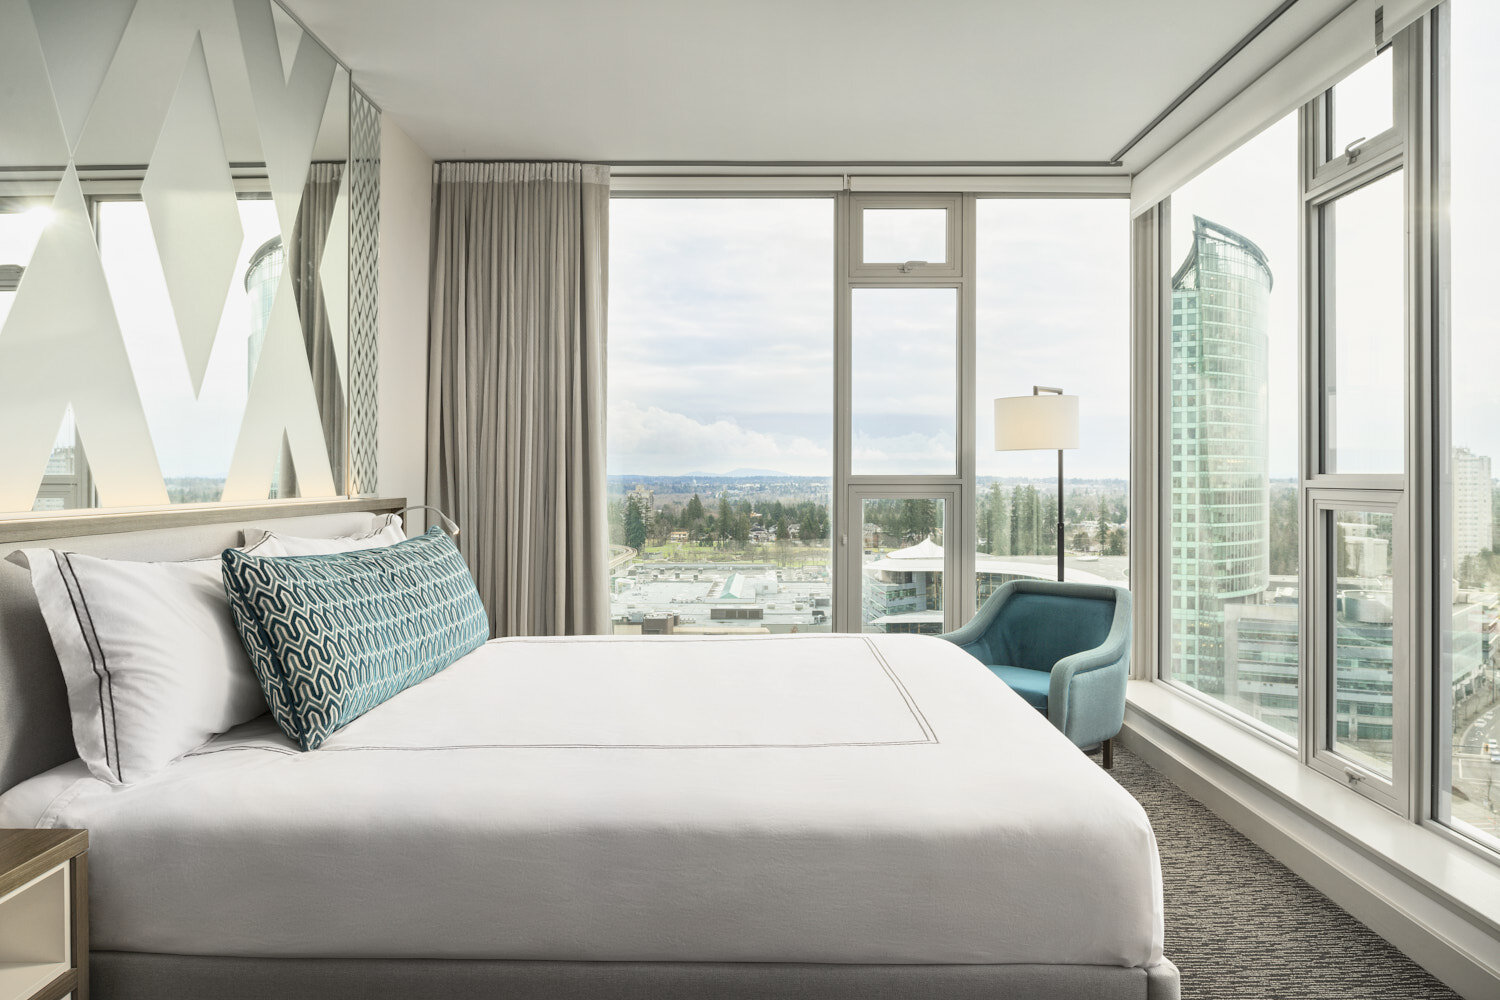 CIVIC-hotel-suite-view_jeremy-segal-photography.jpg